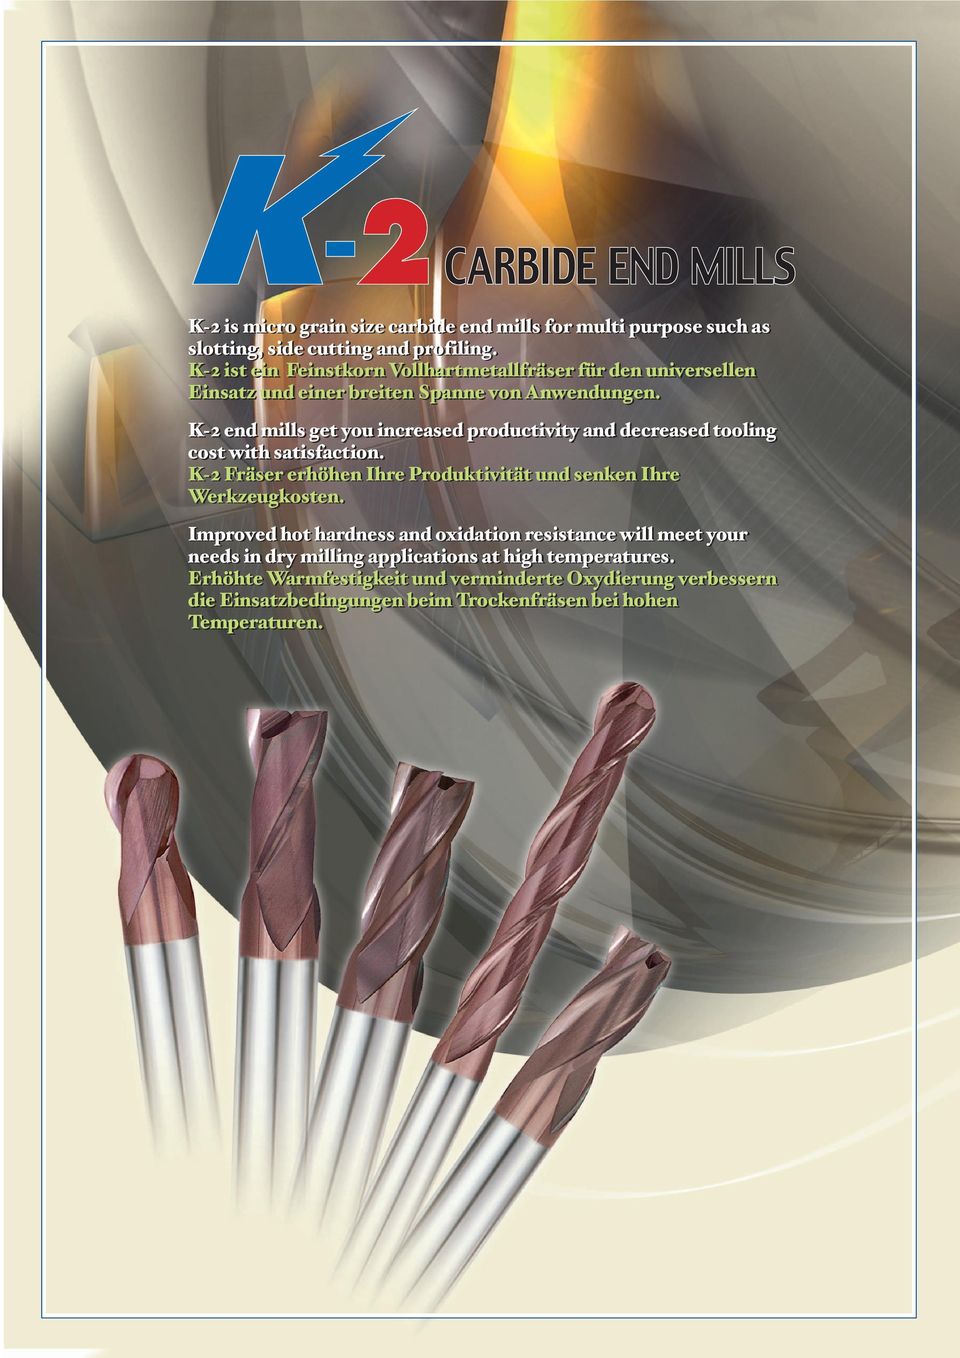 K-2 end mills get you increased productivity and decreased tooling cost with satisfaction.